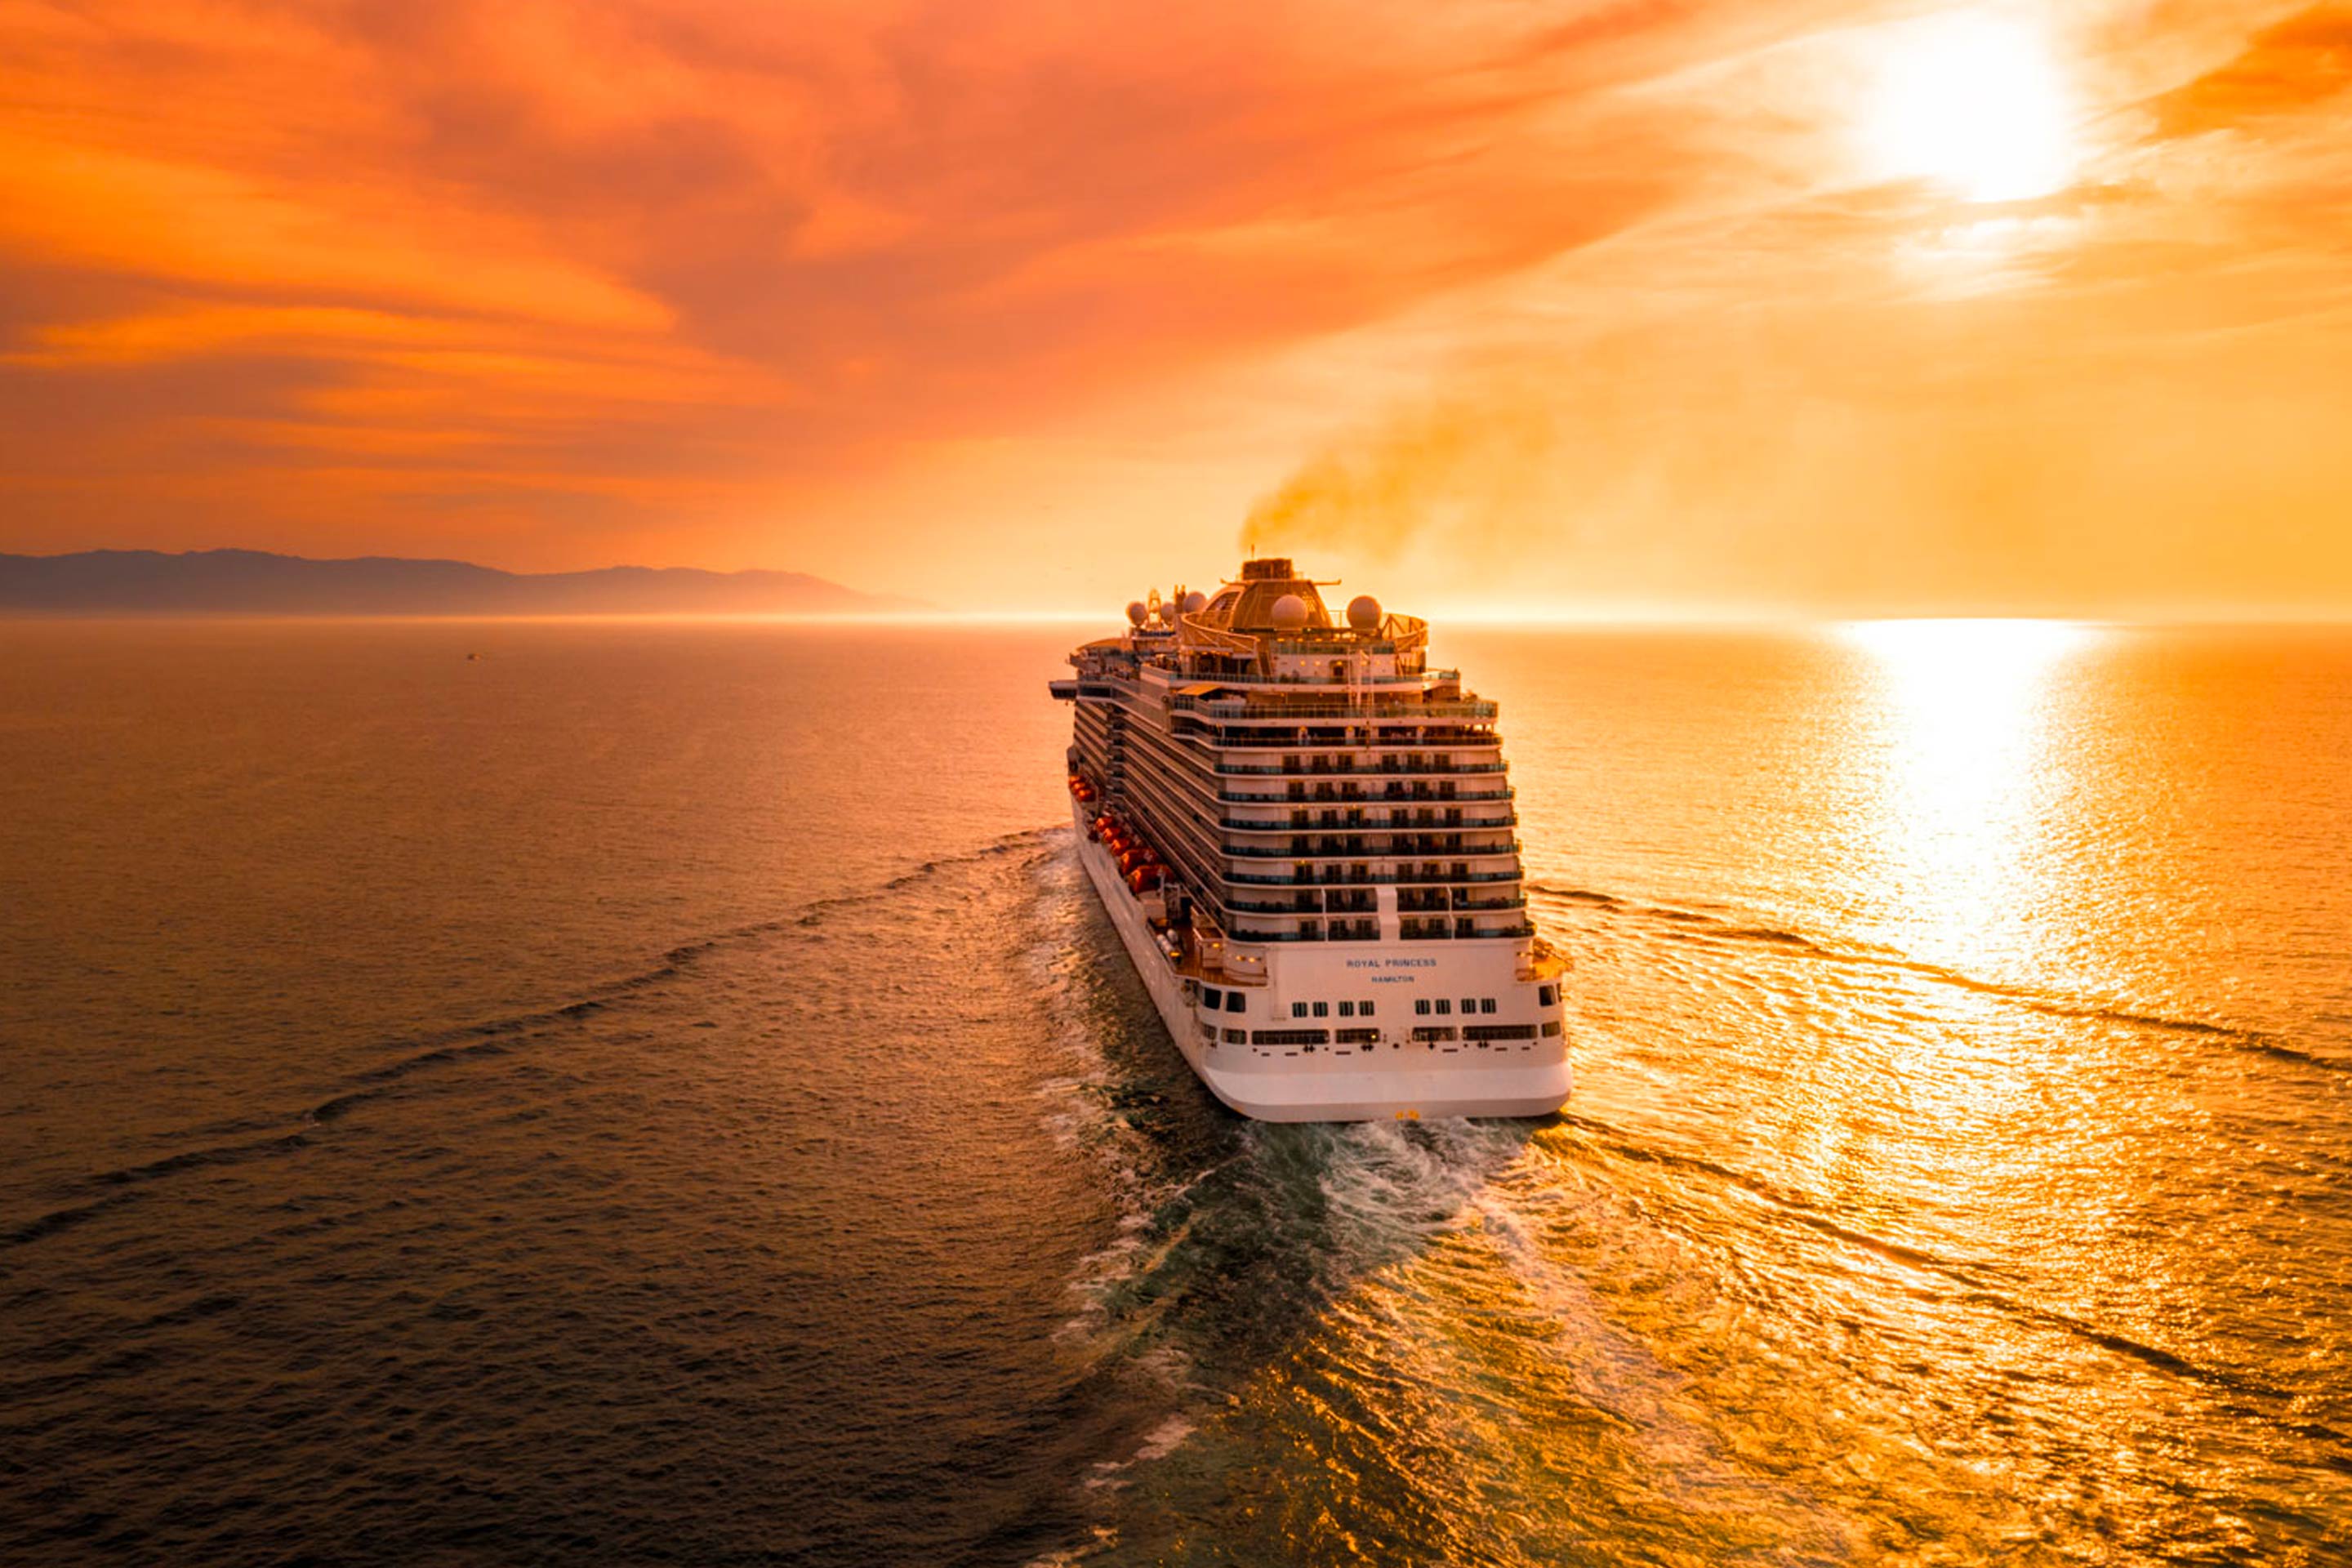 A ship at sea with a sunset background